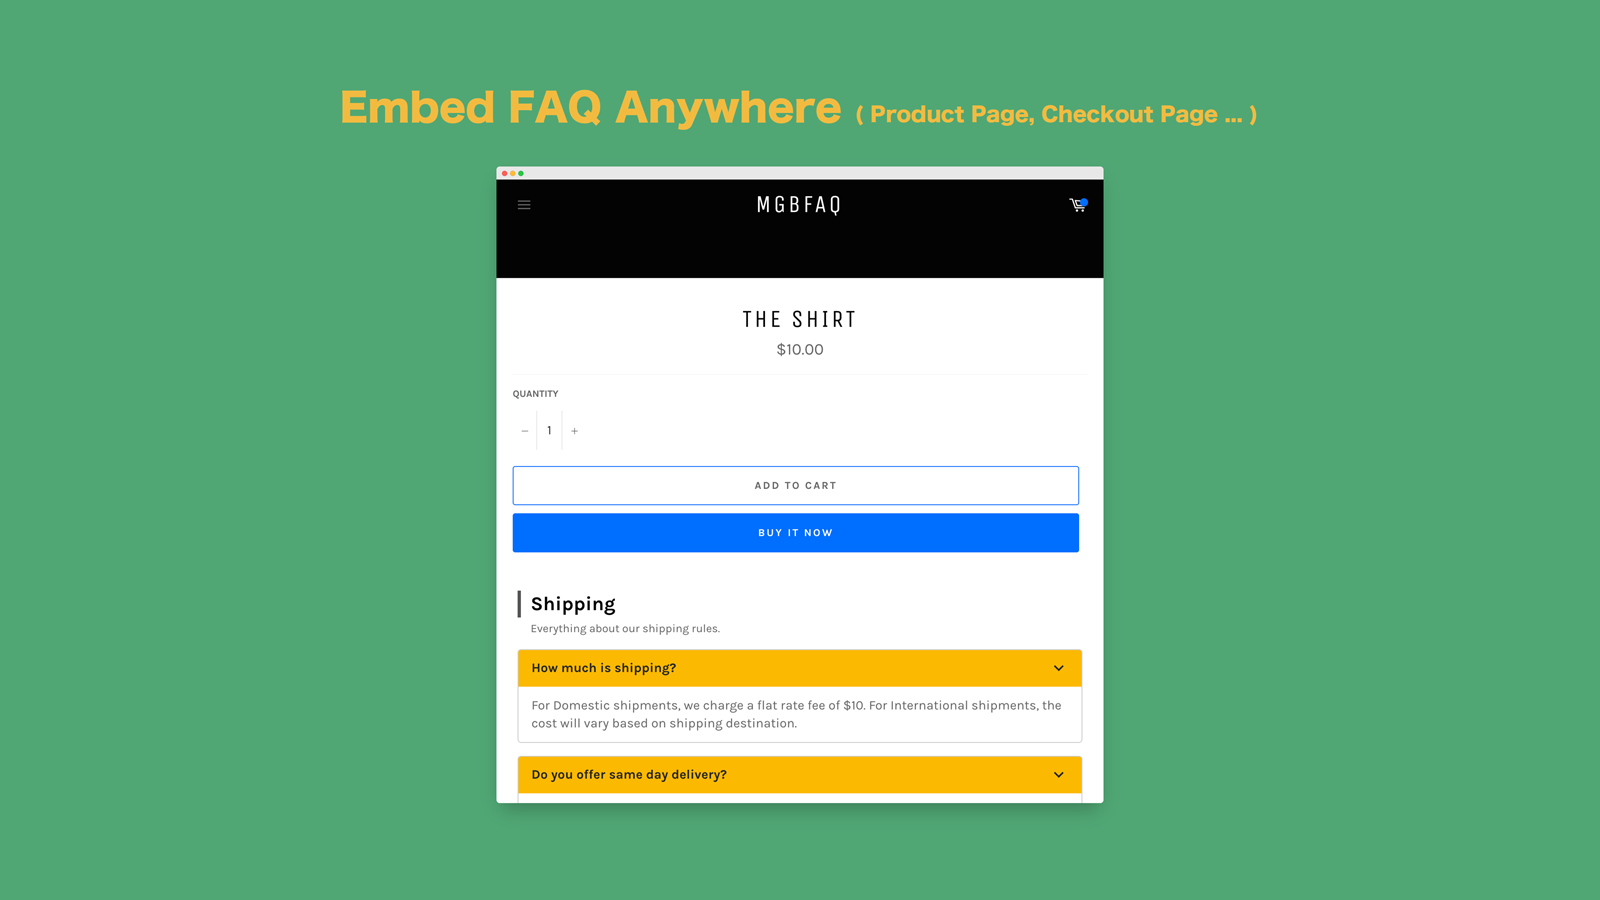 Embed faqs anywhere in product page, checkout page, home page